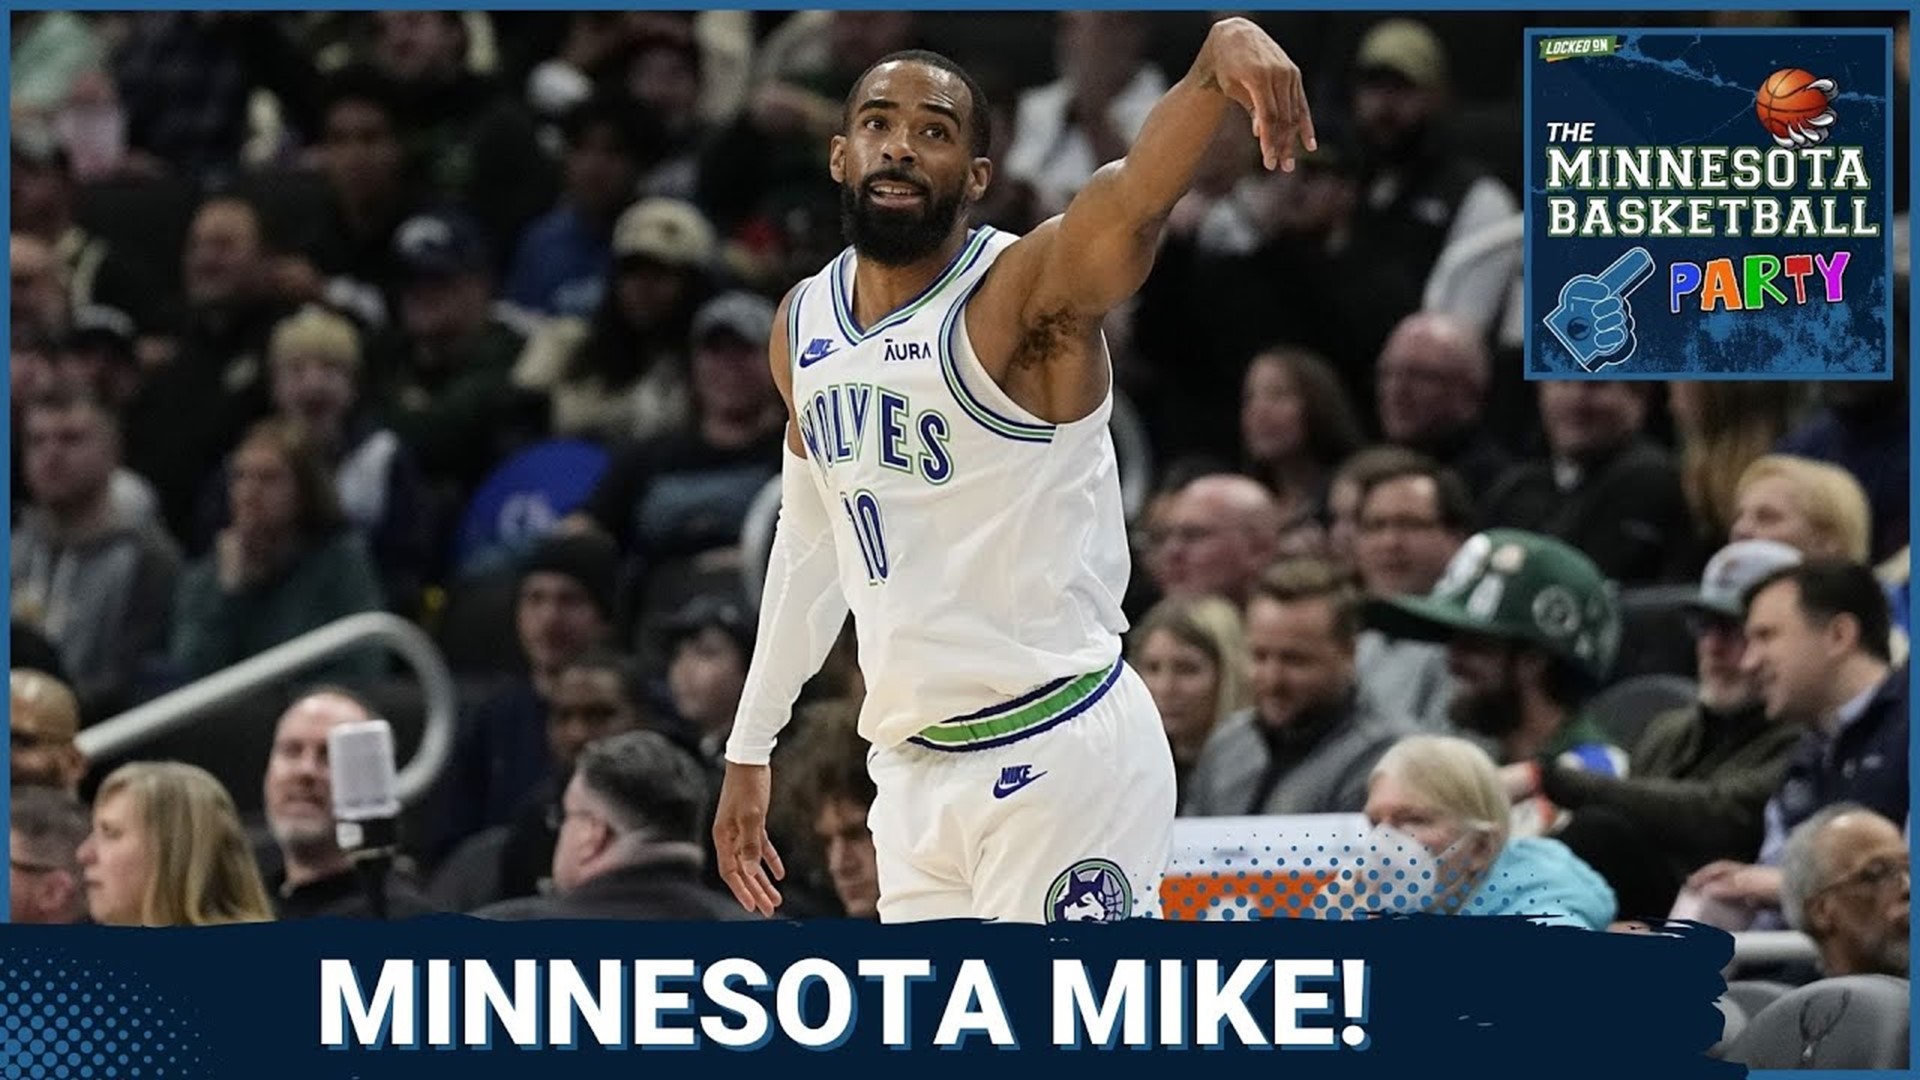 What the Mike Conley EXTENSION Means to the Minnesota Timberwolves - The Minnesota Basketball Party